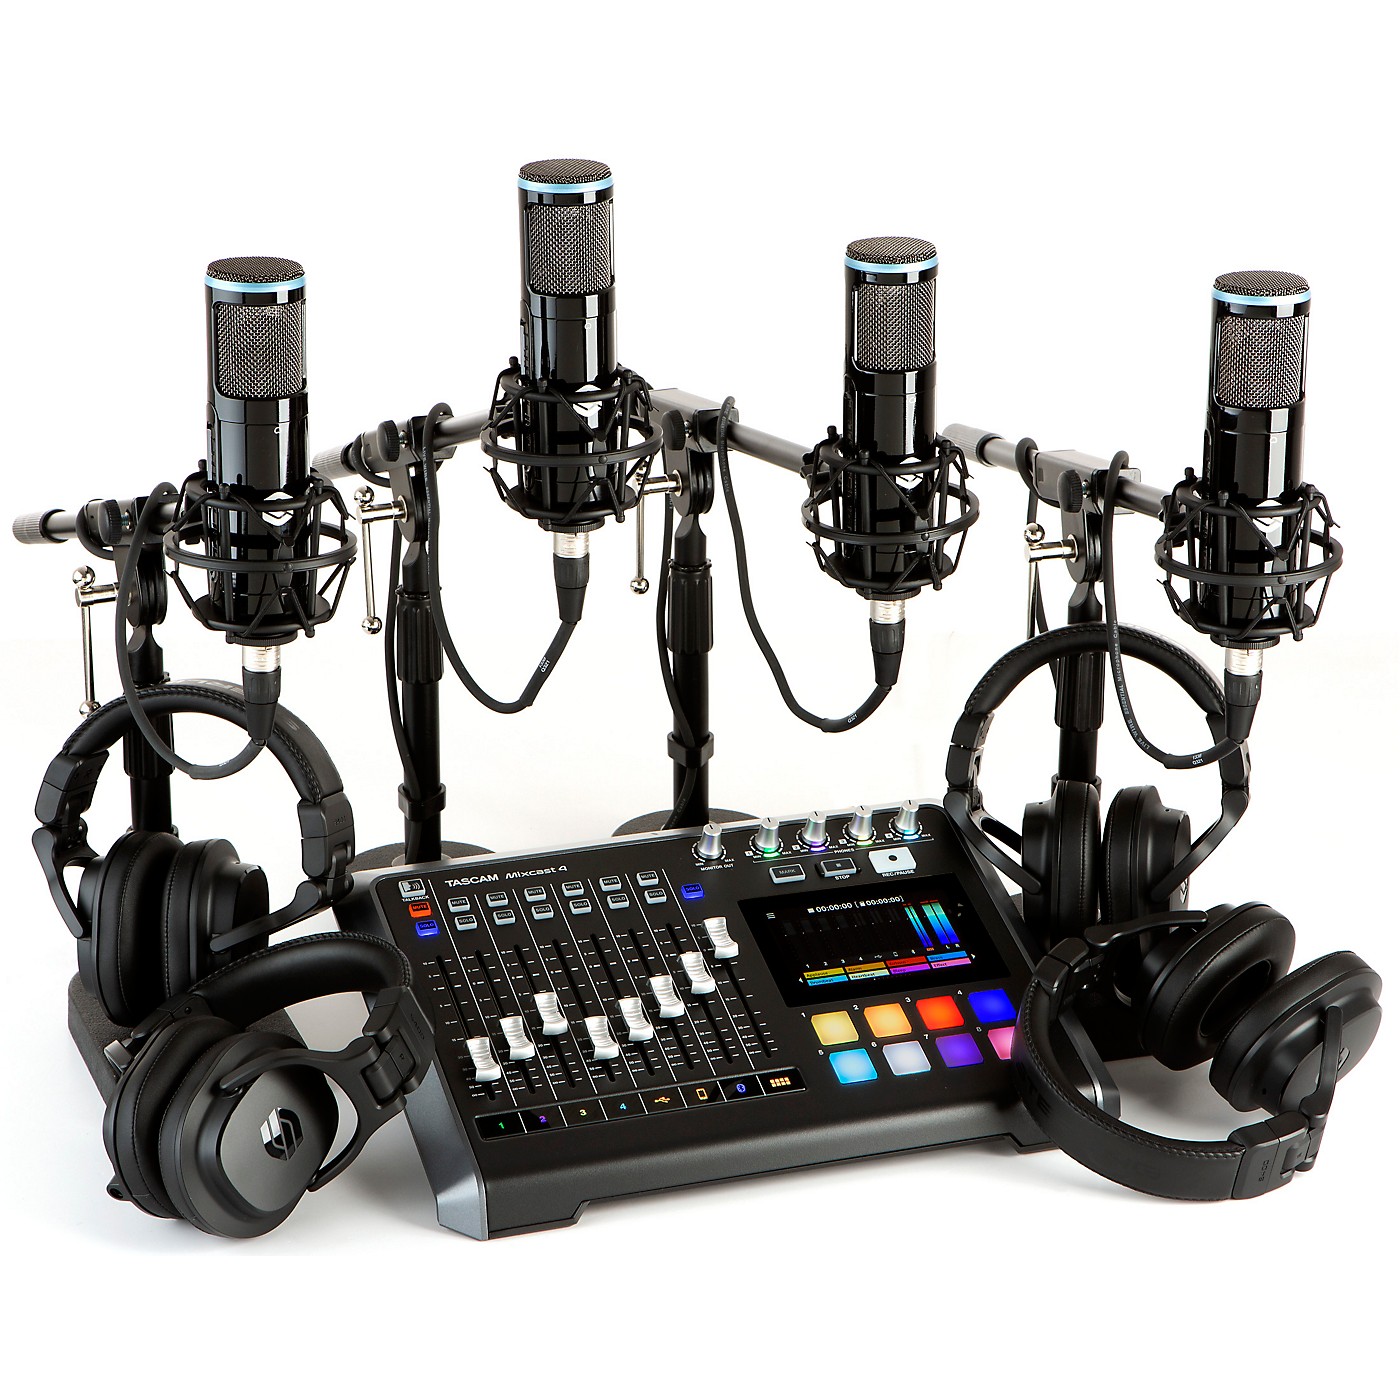 Tascam Mixcast 4 4-Person Podcasting Bundle With Sterling Audio SP150 Microphones and S400 Studio Headphones thumbnail